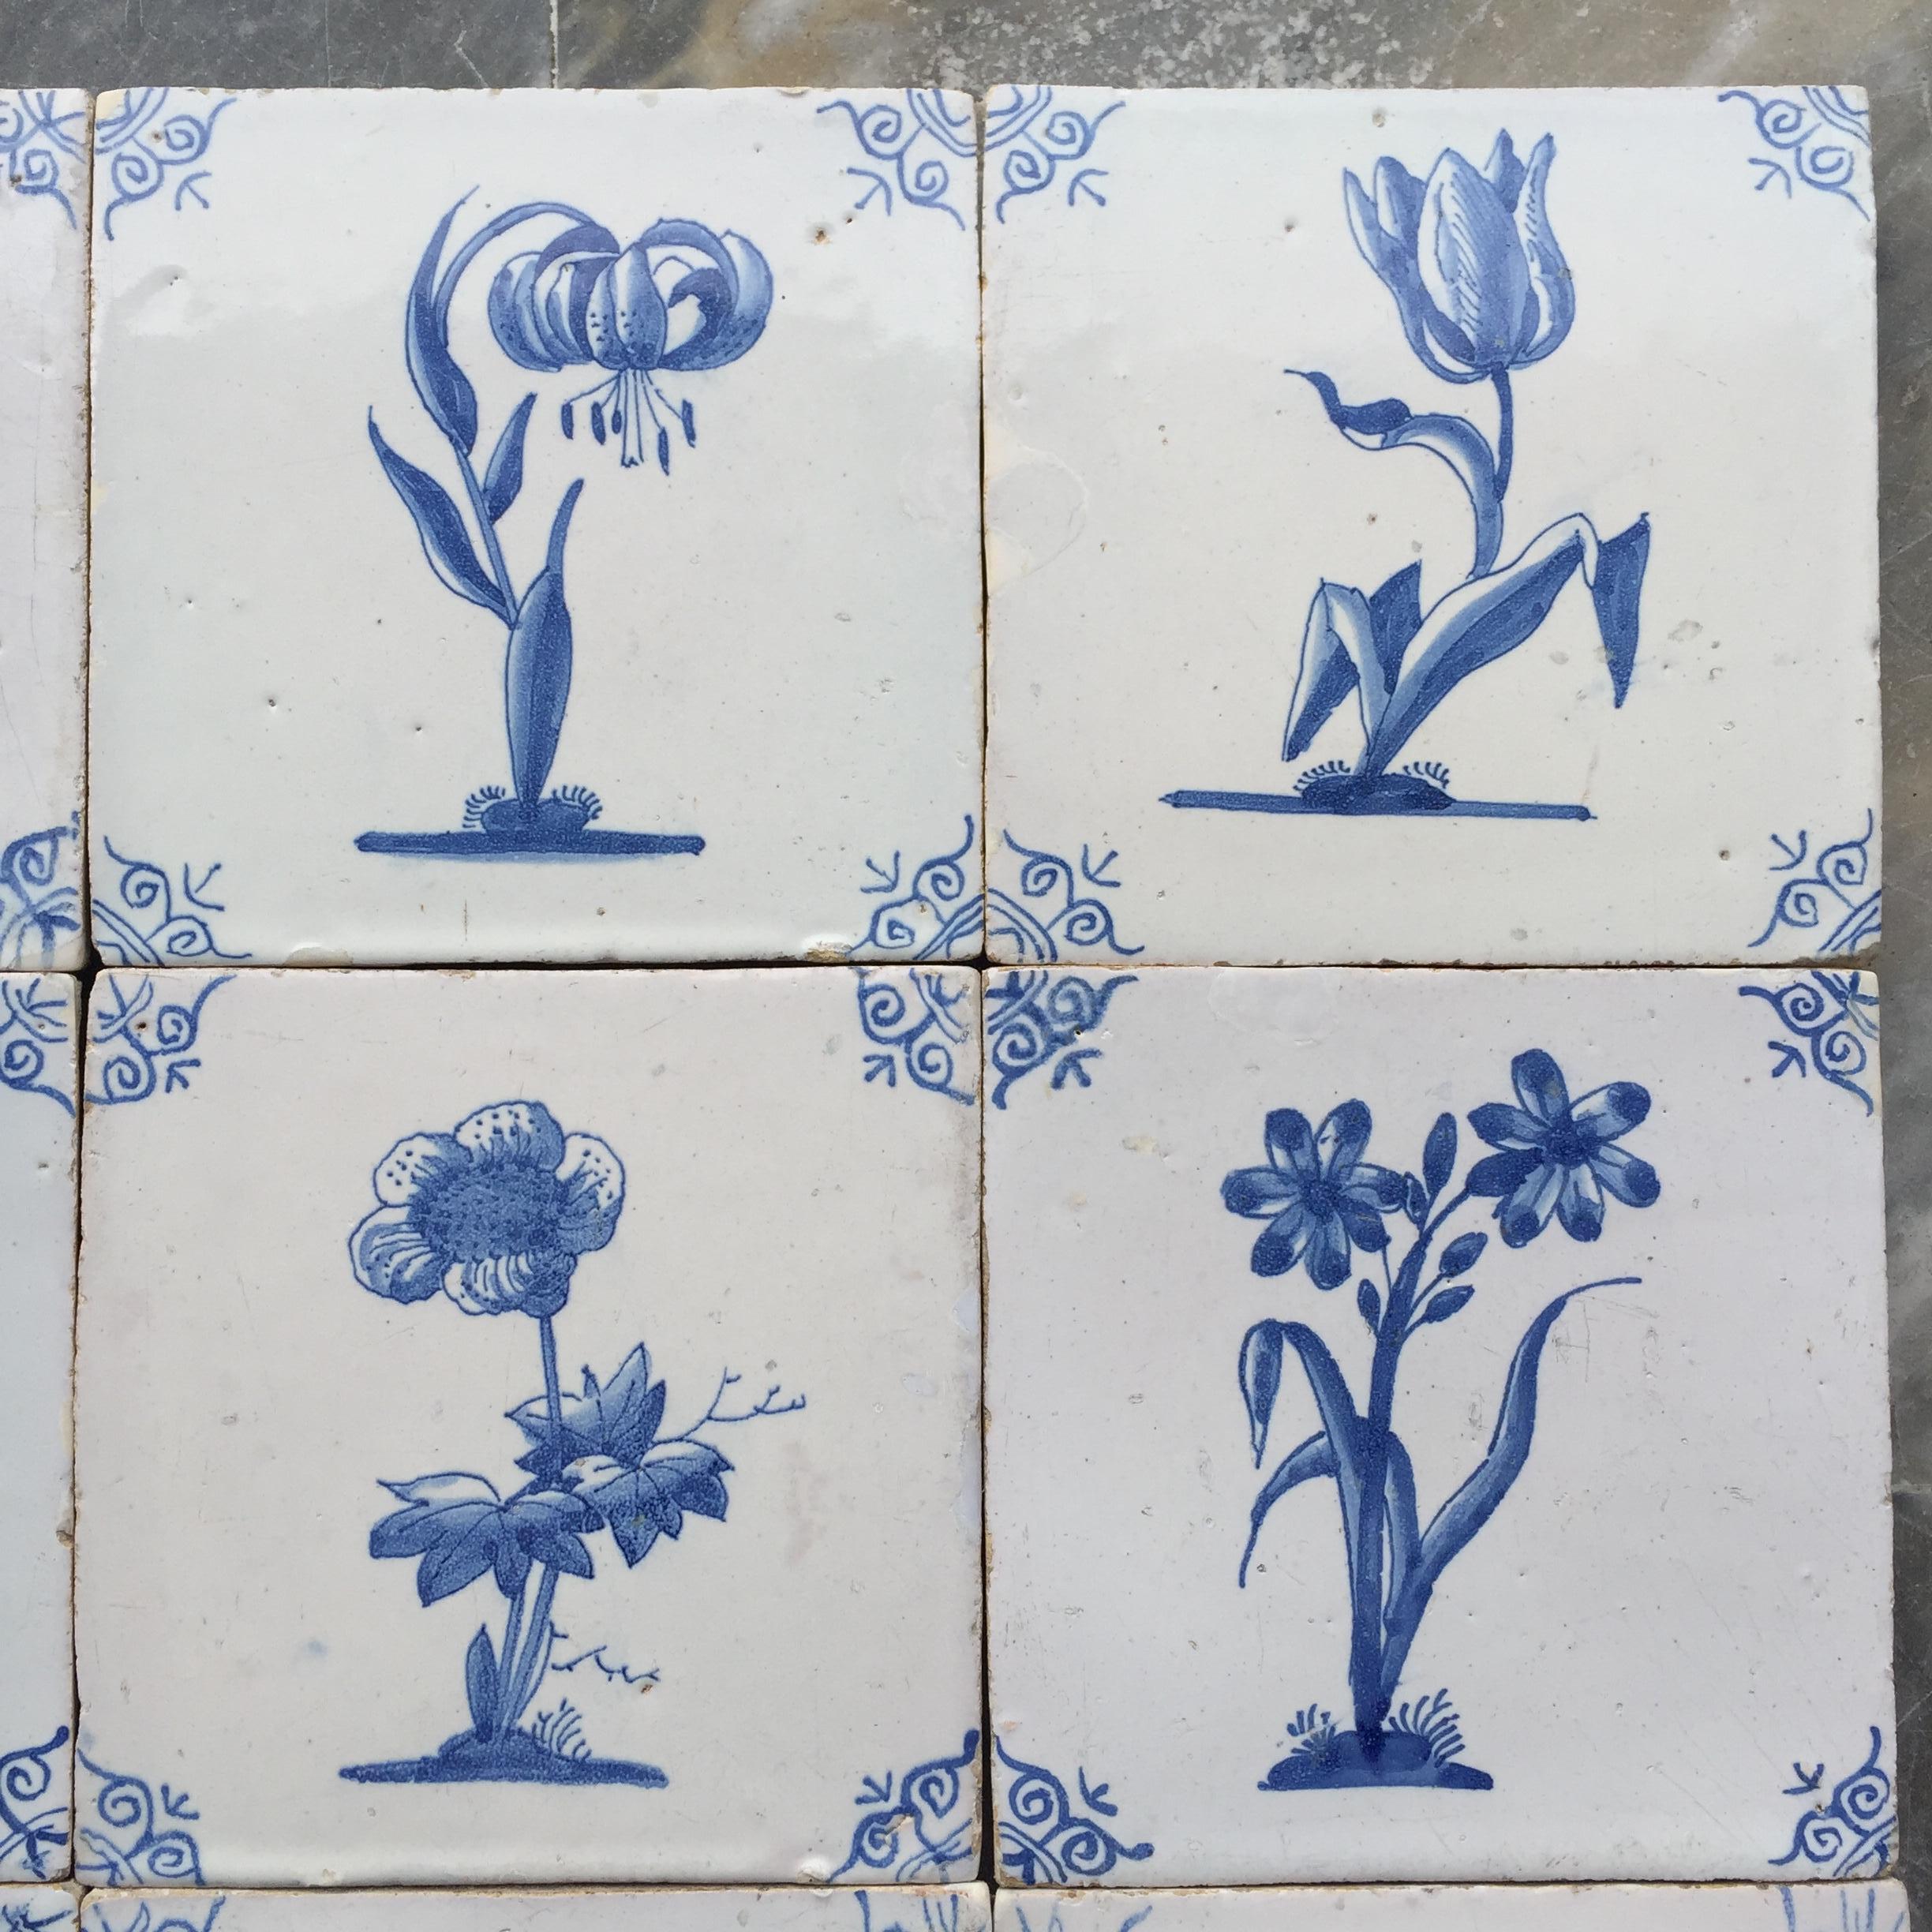 how to make delft tiles